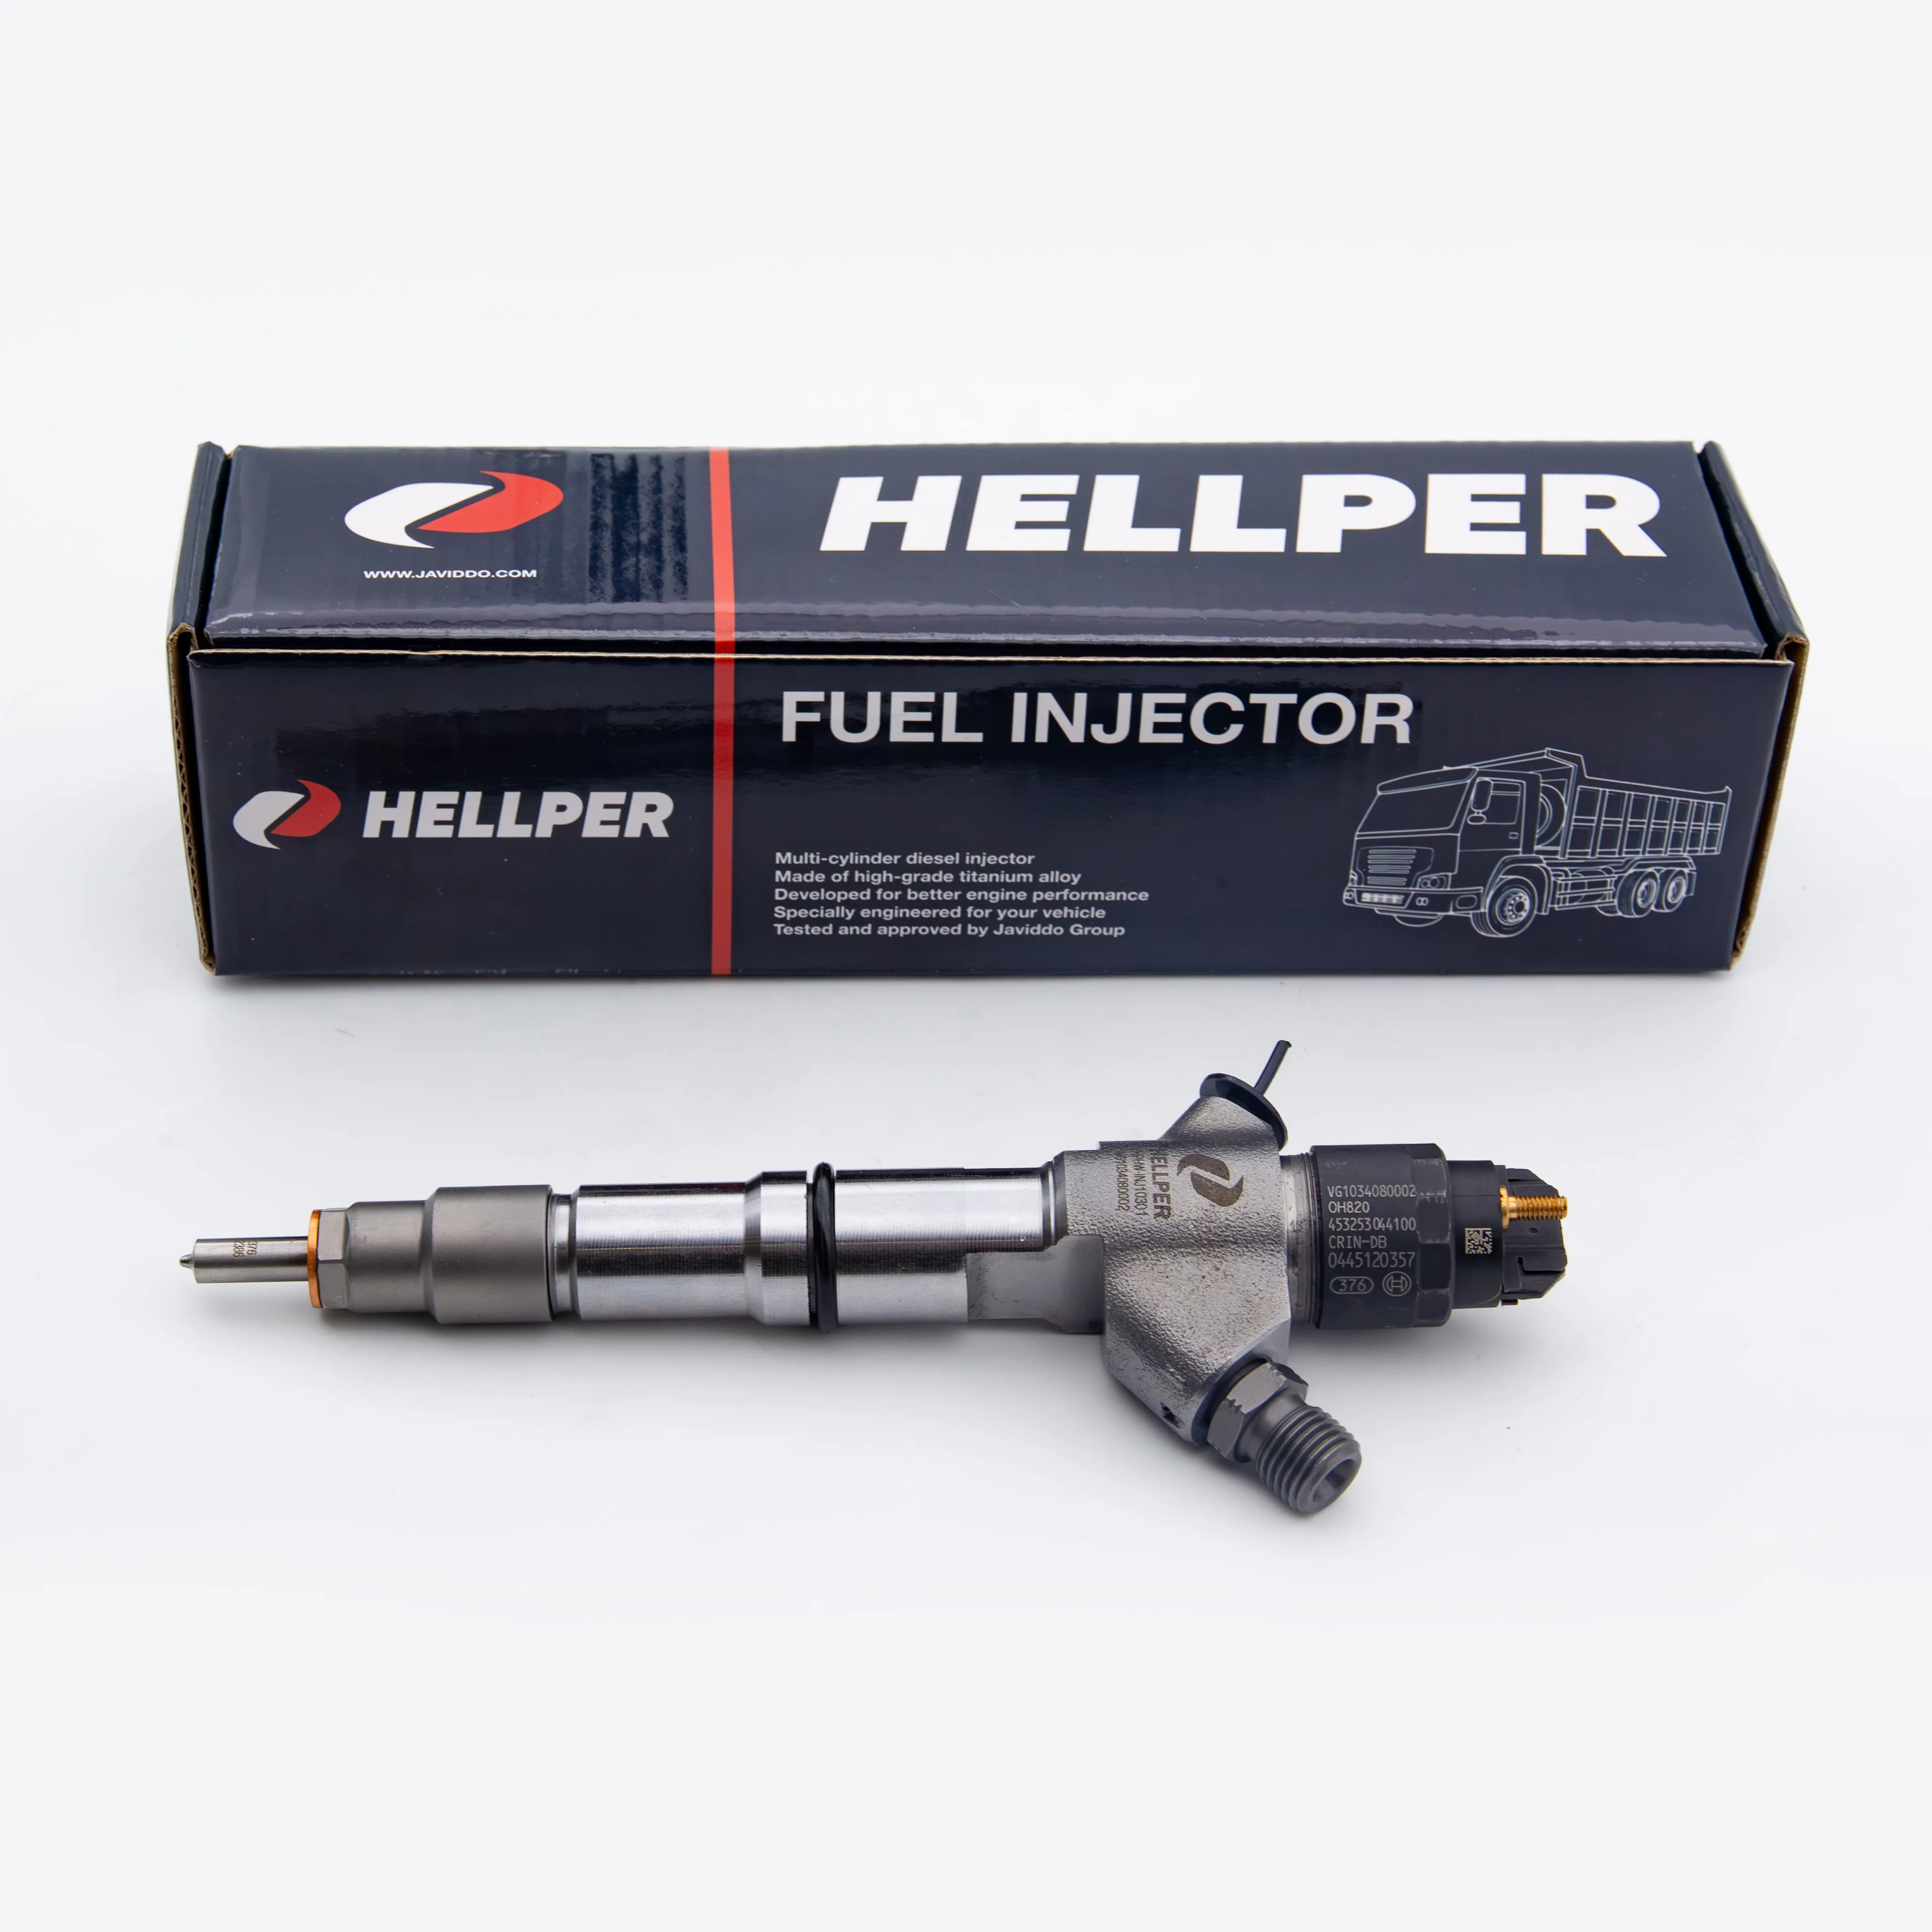 OEM Fuel Injector for HOWO Sinotruk VG1034080002 by Hellper